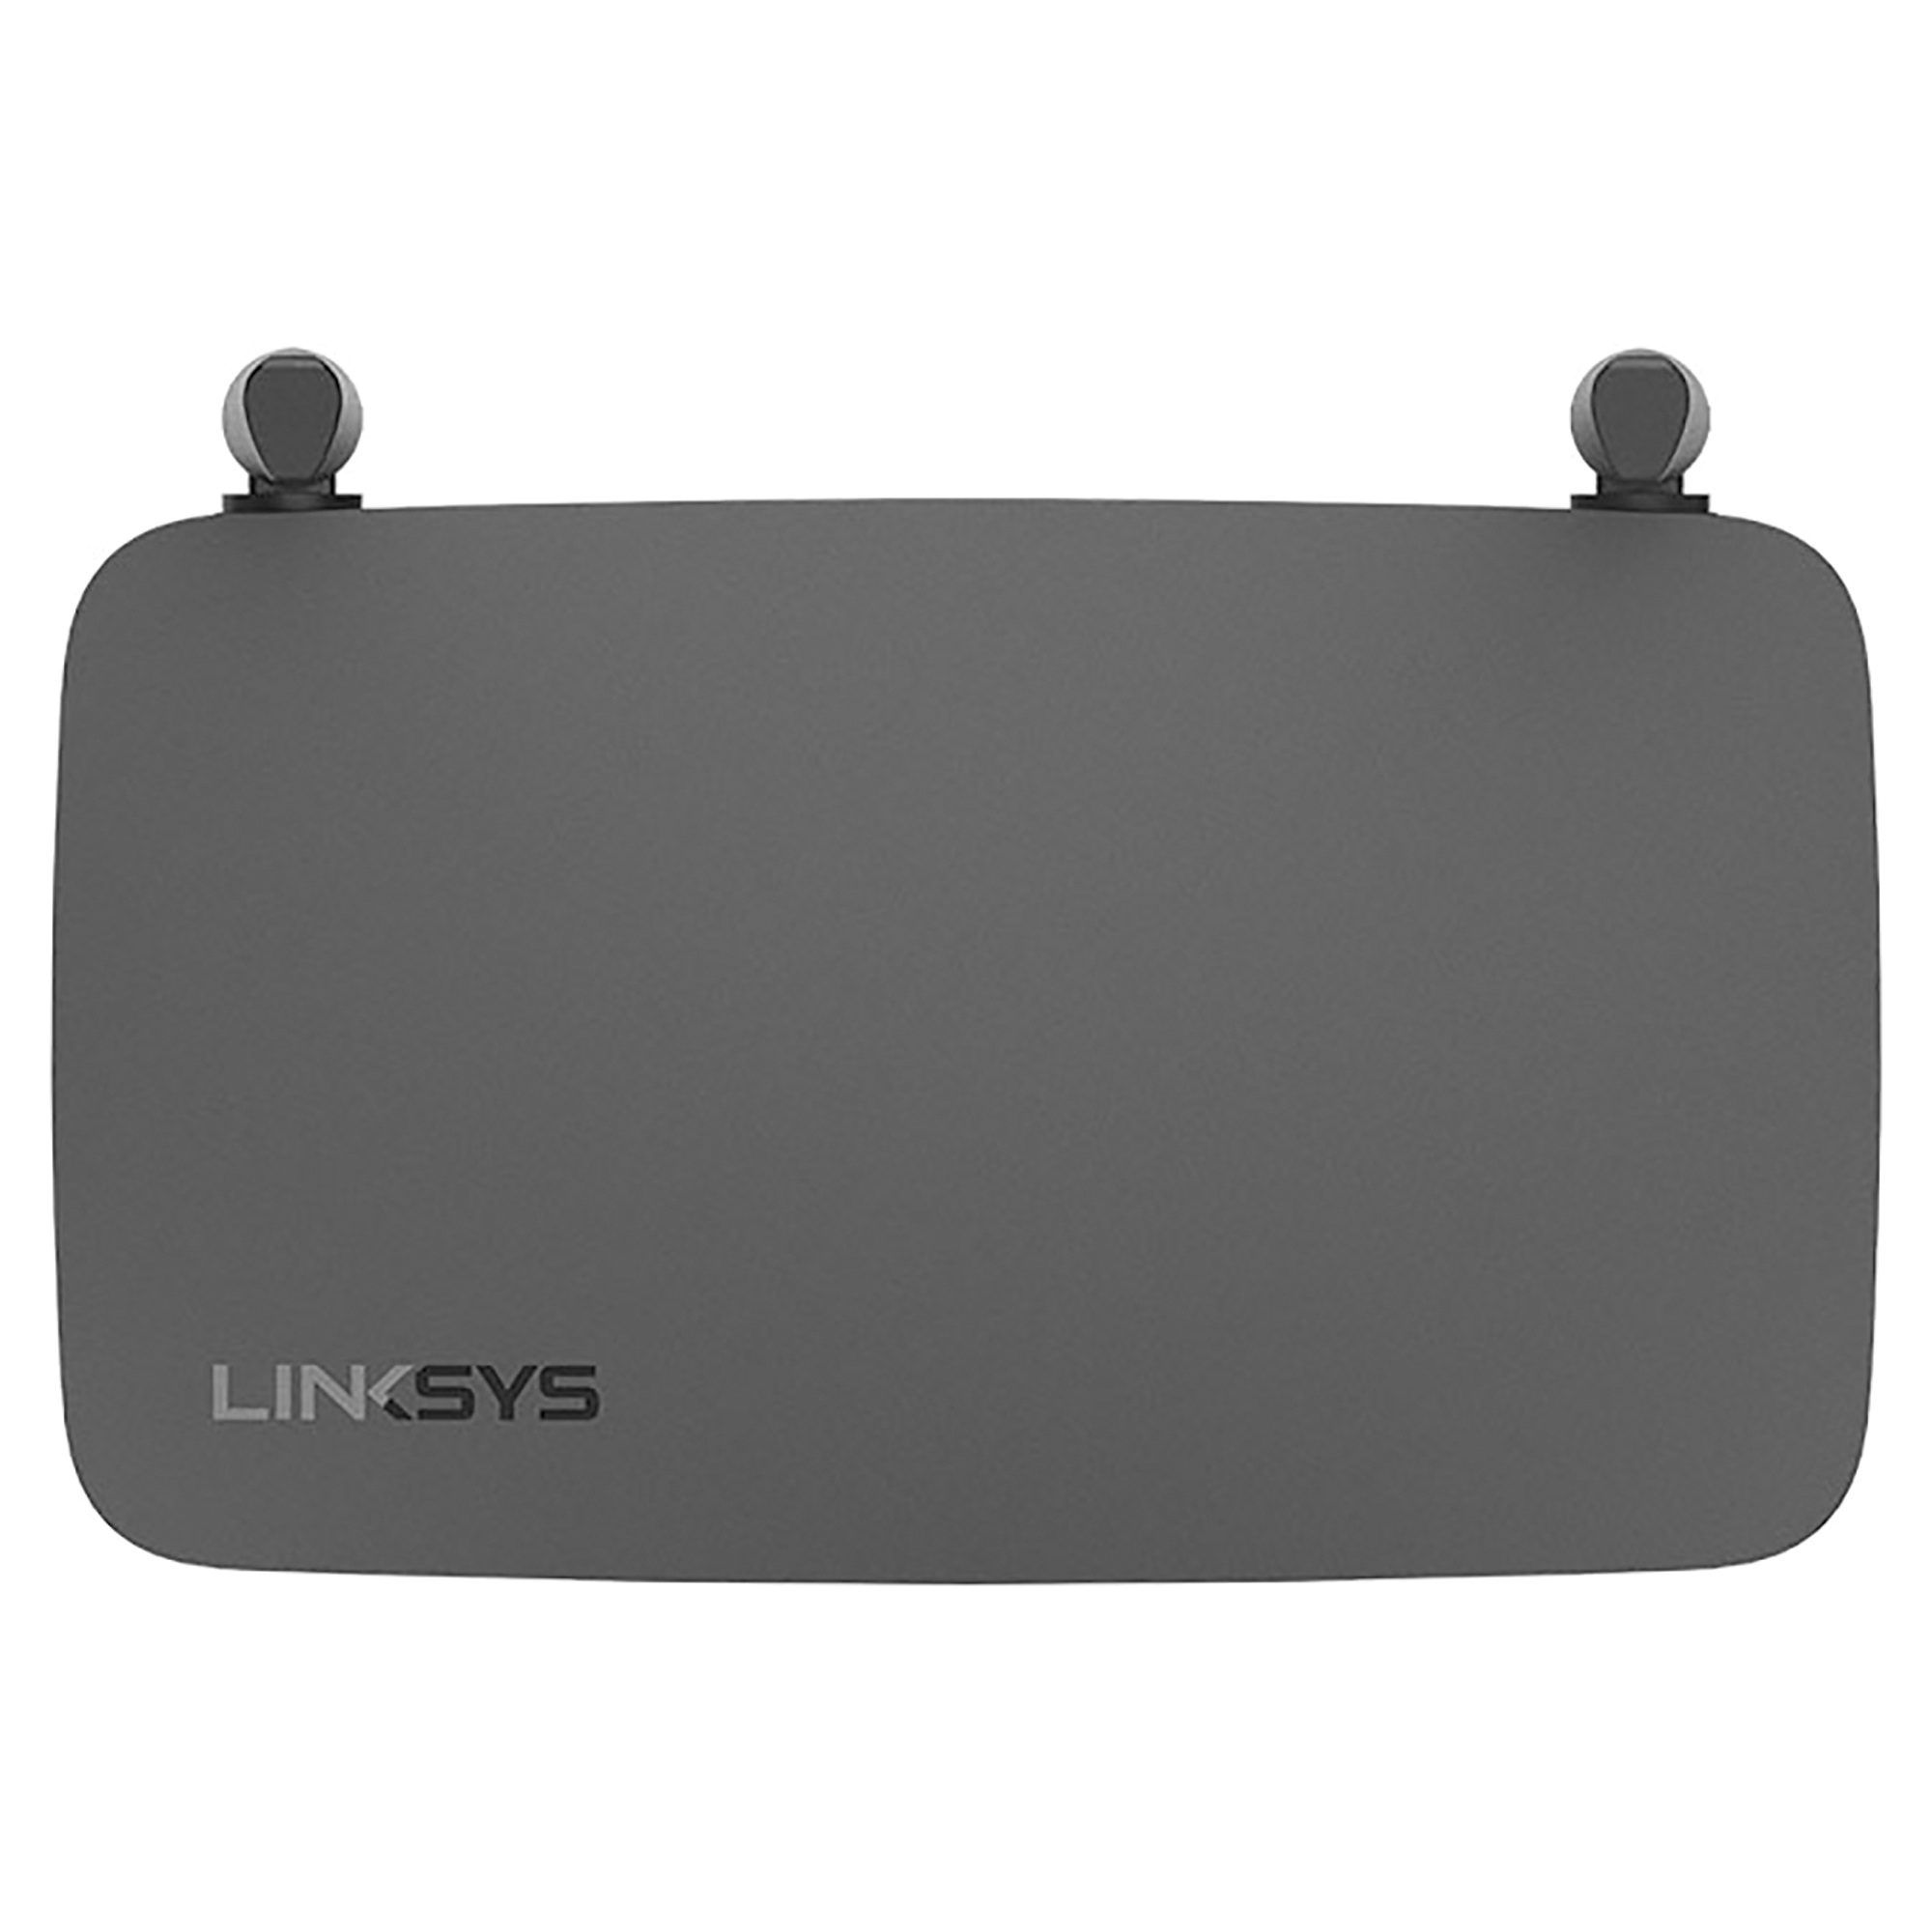 Linksys E2500 N600 Dual-Band WiFi Router - image 4 of 9